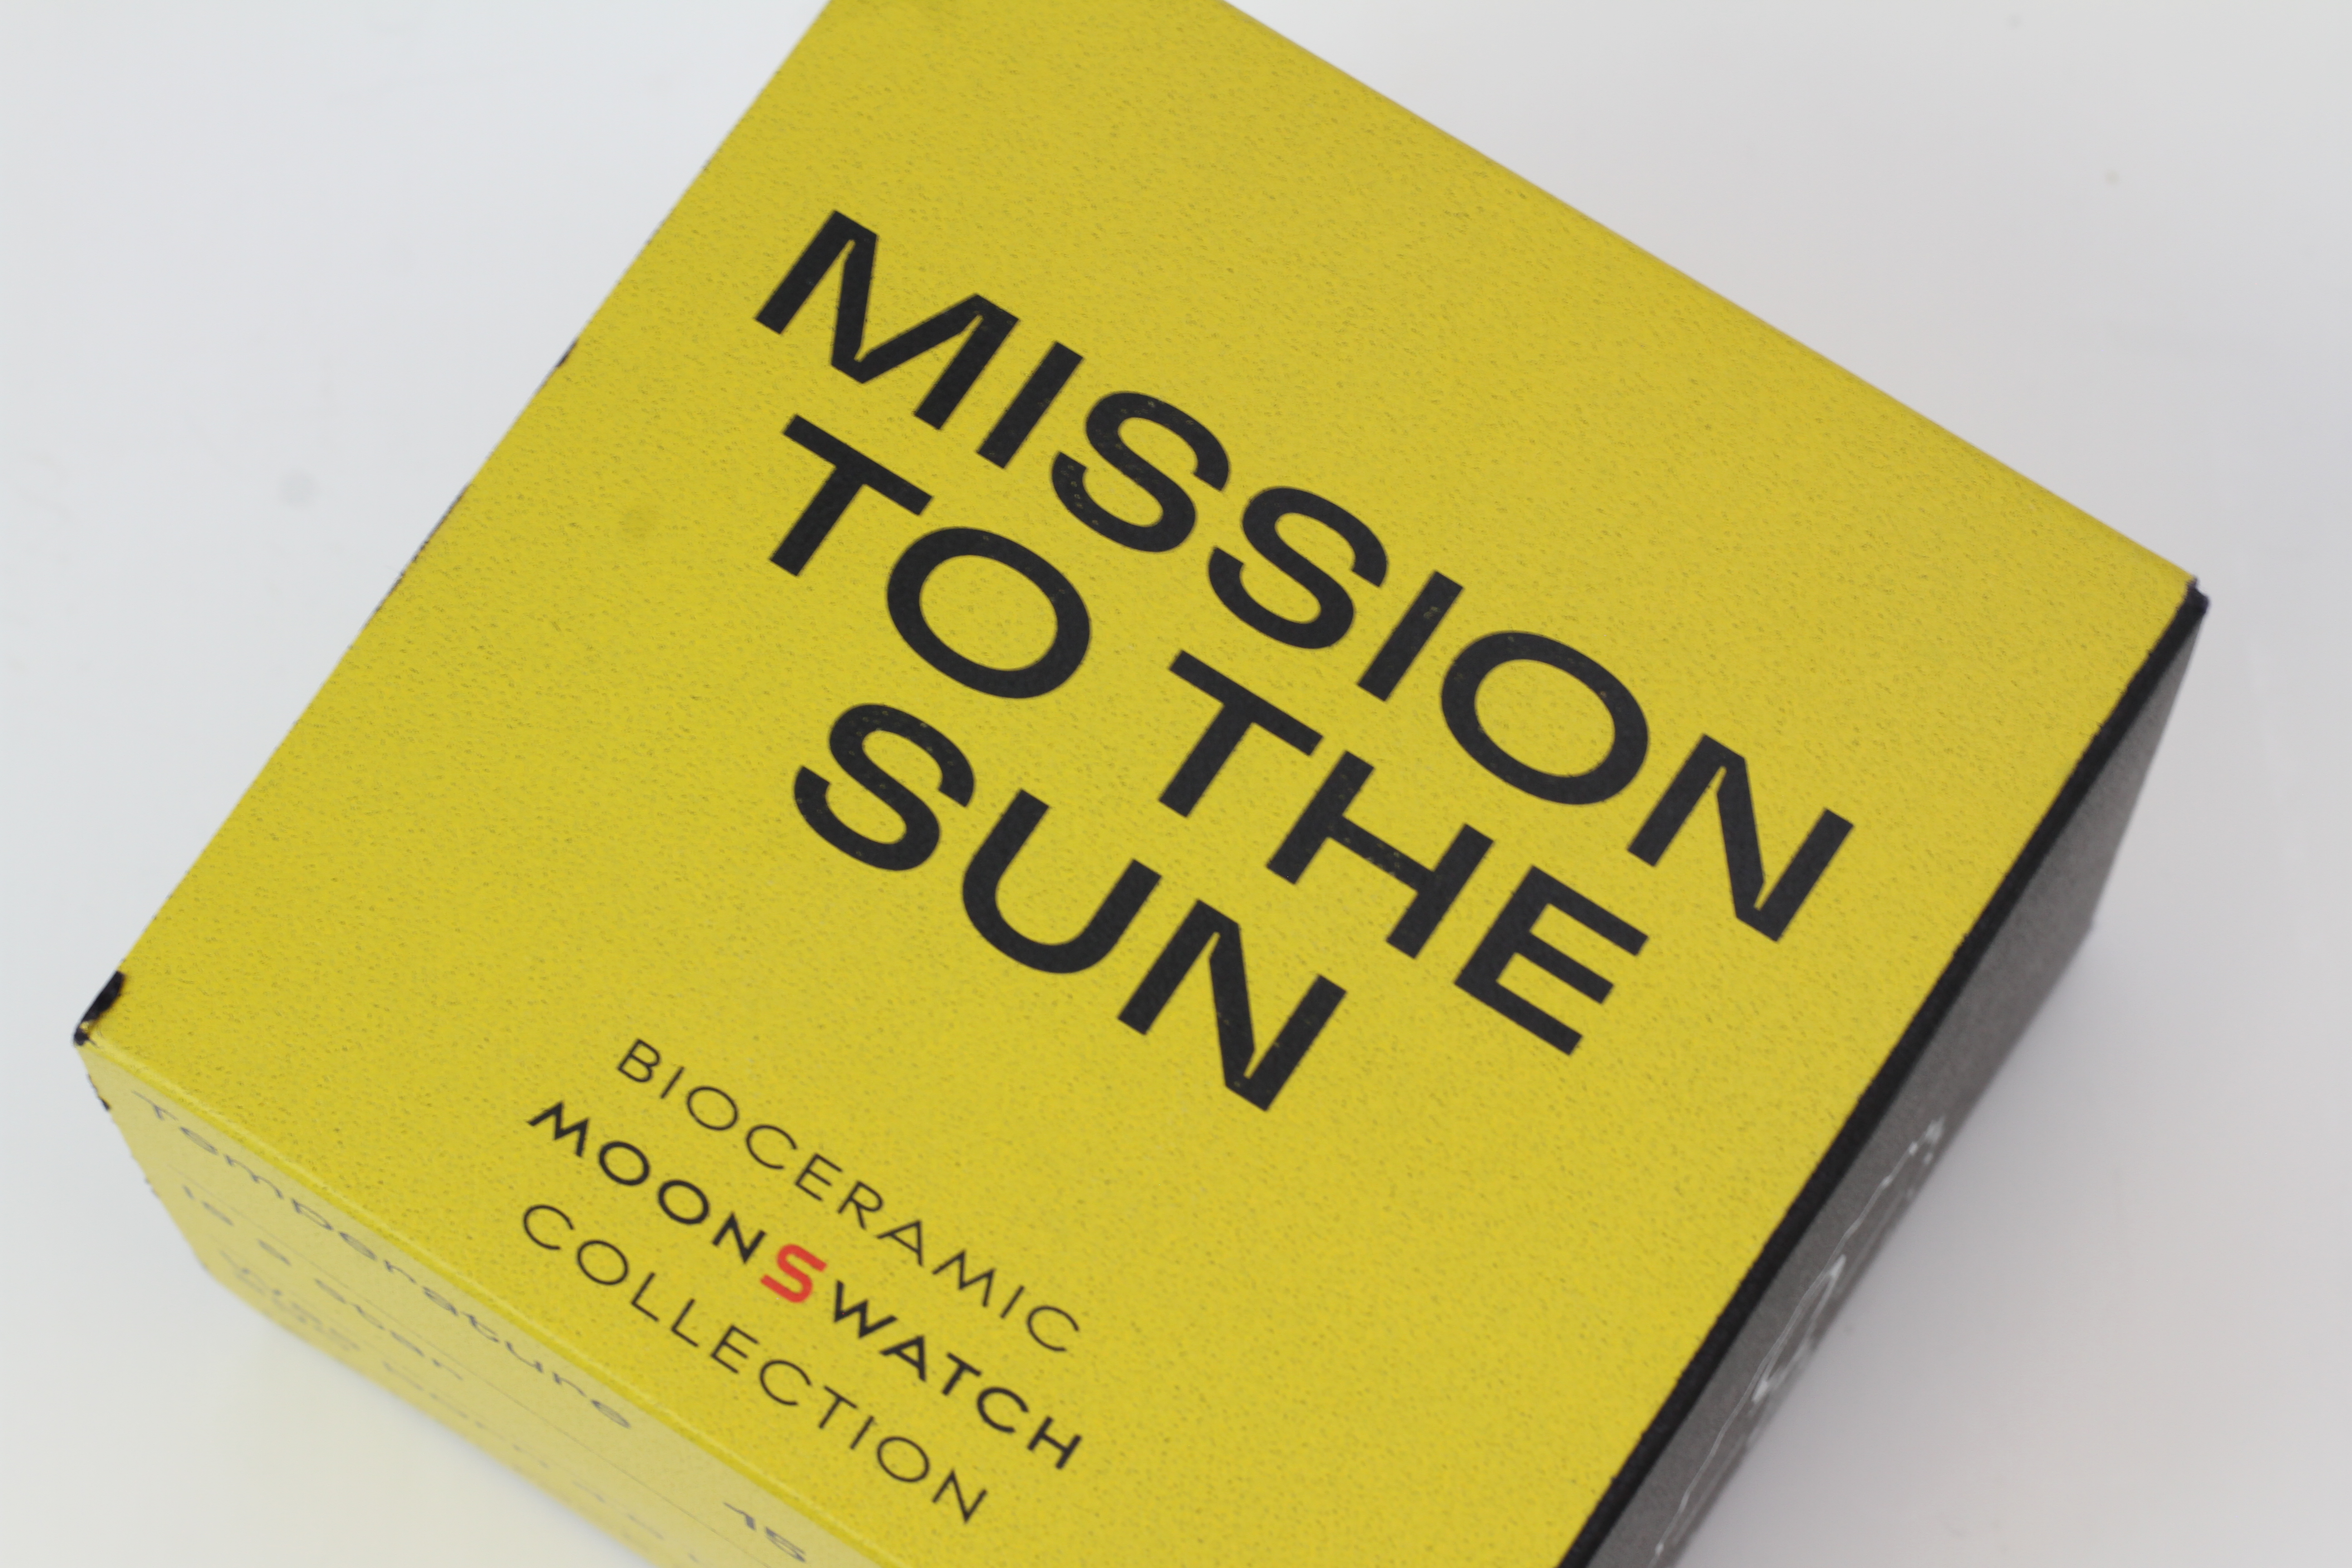 *TO BE SOLD WITHOUT RESERVE* OMEGA X SWATCH MOONSWATCH MISSION TO THE SUN - Image 2 of 4